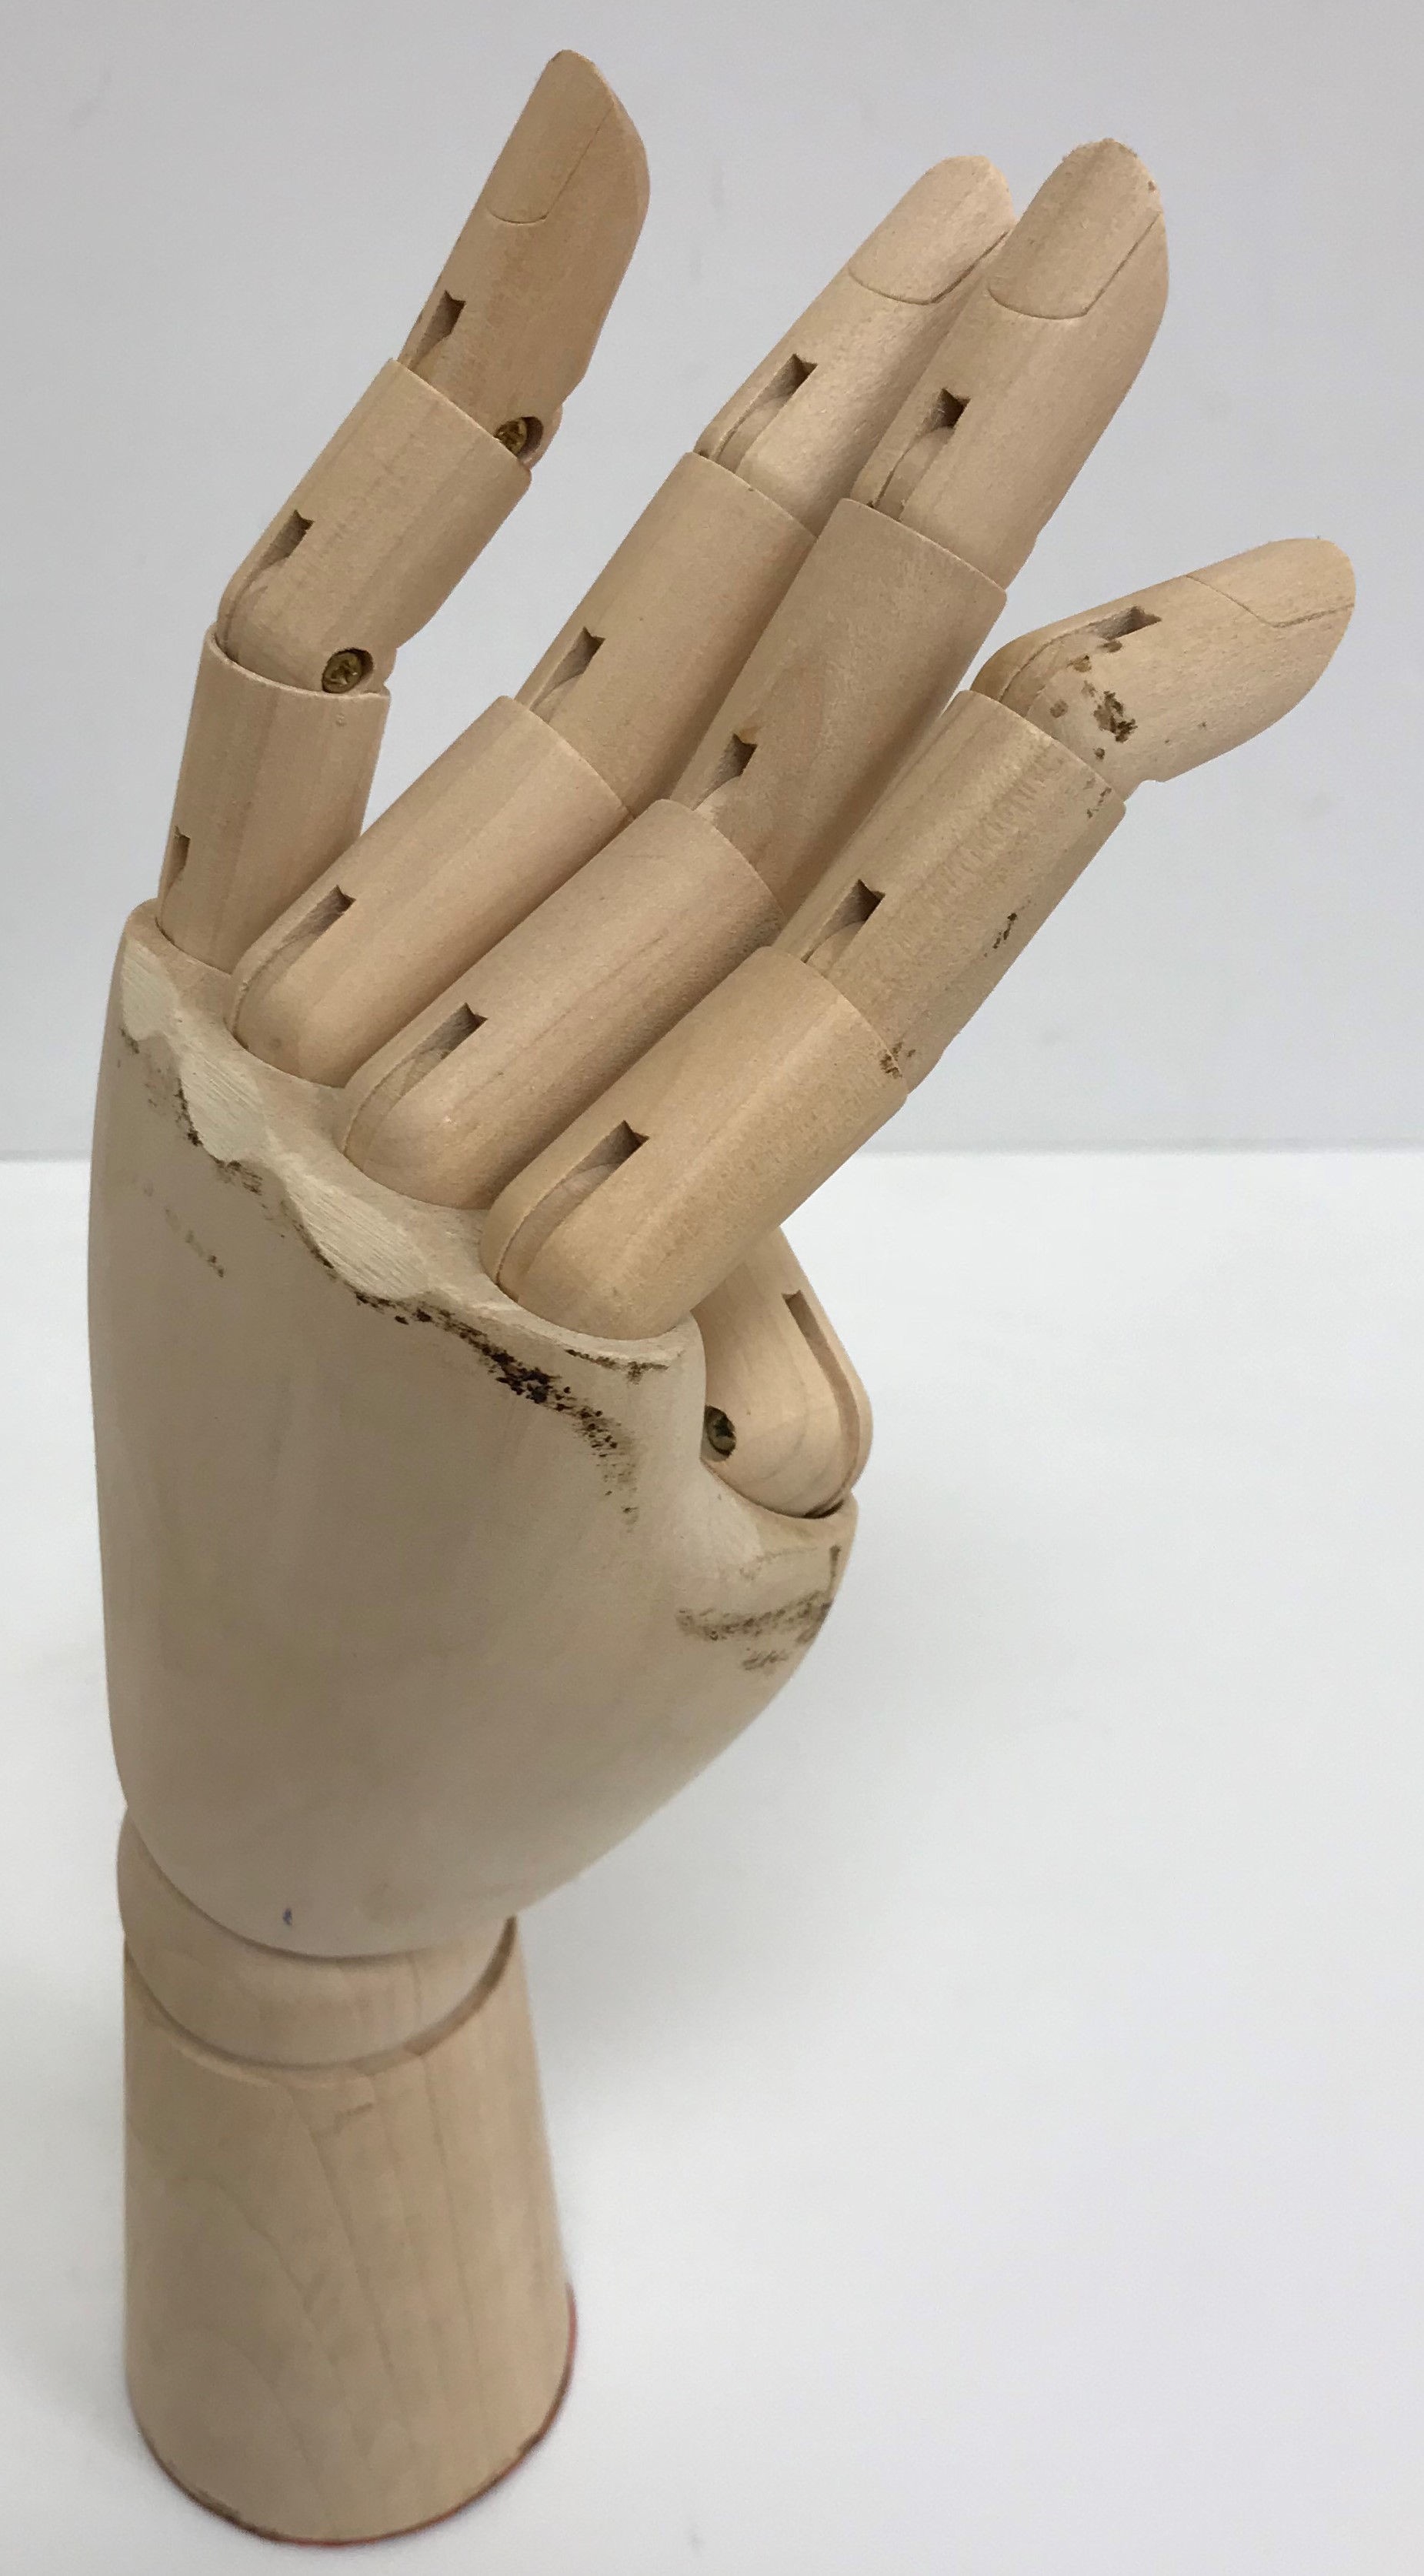 Two wooden artist's model hands, with jo - Image 3 of 3